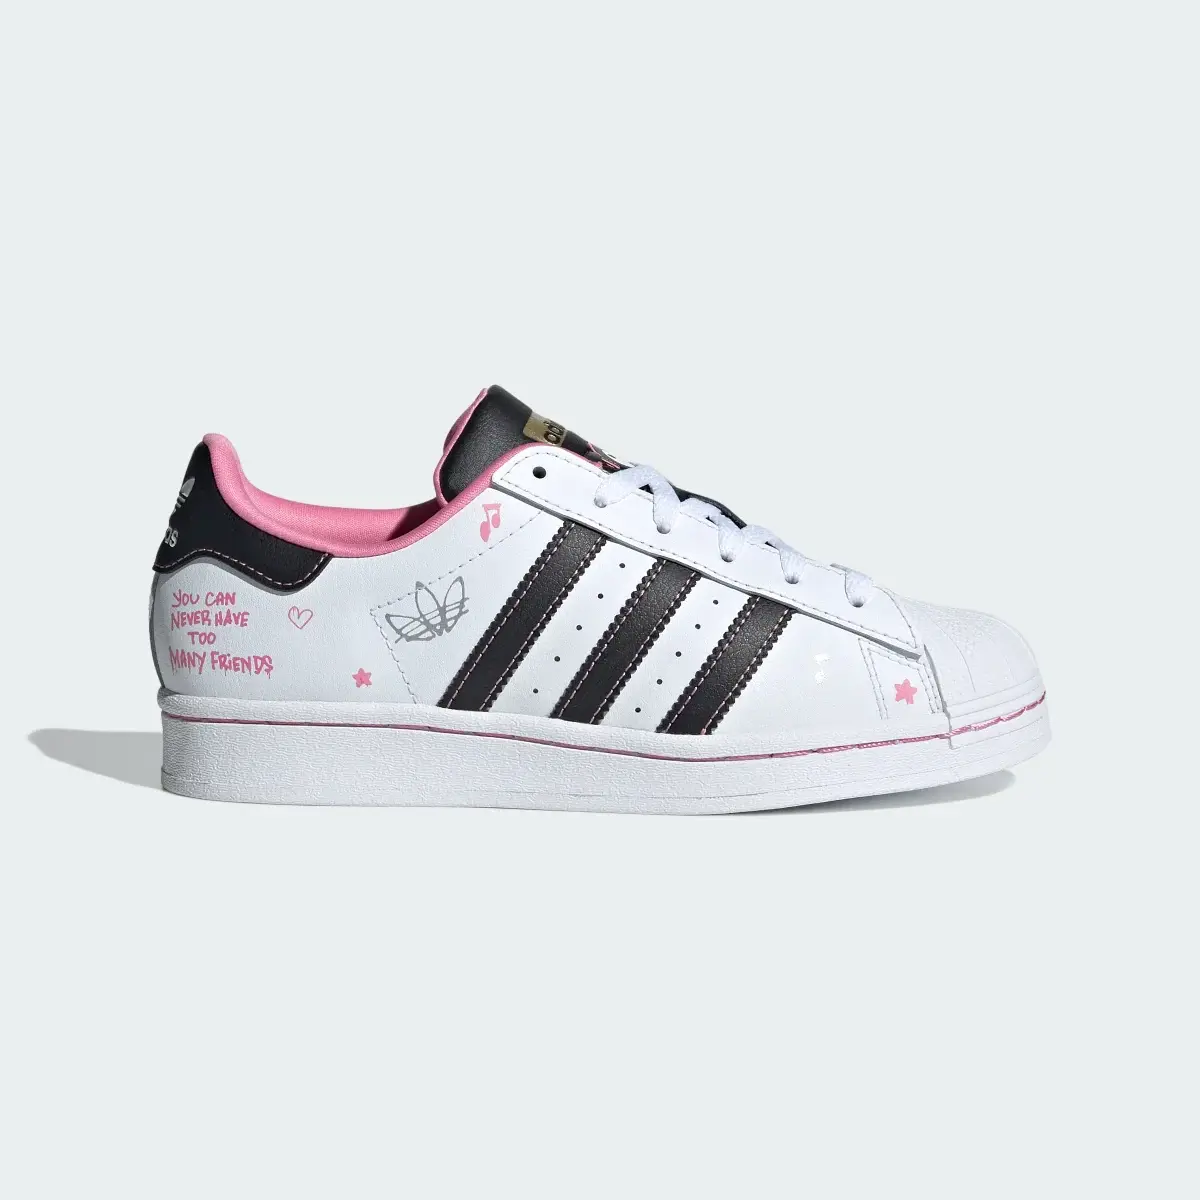 Adidas Originals x Hello Kitty and Friends Superstar Shoes Kids. 2